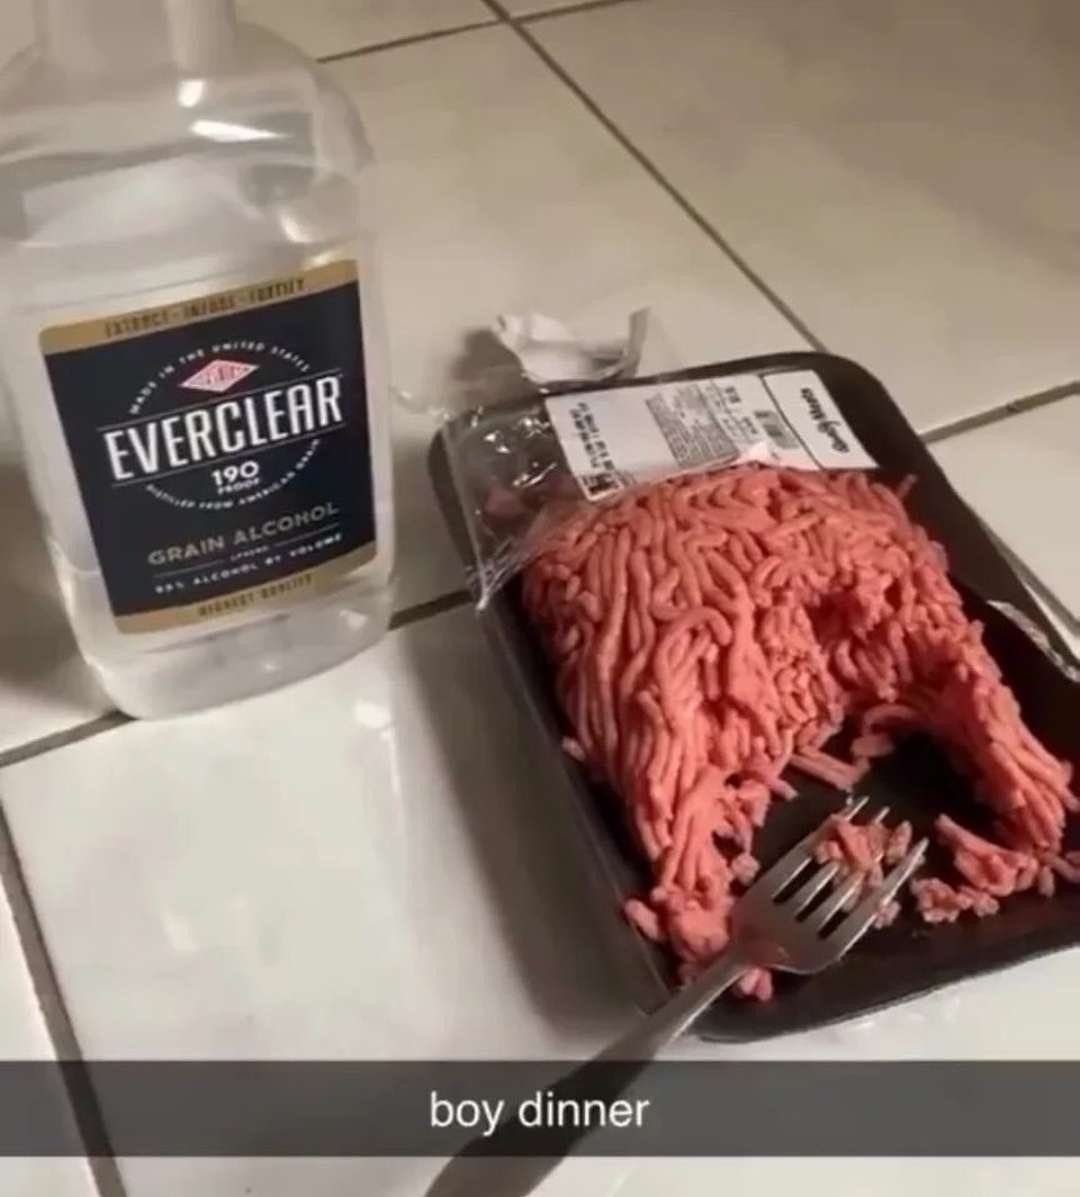 The alcohol counts as meat preperation